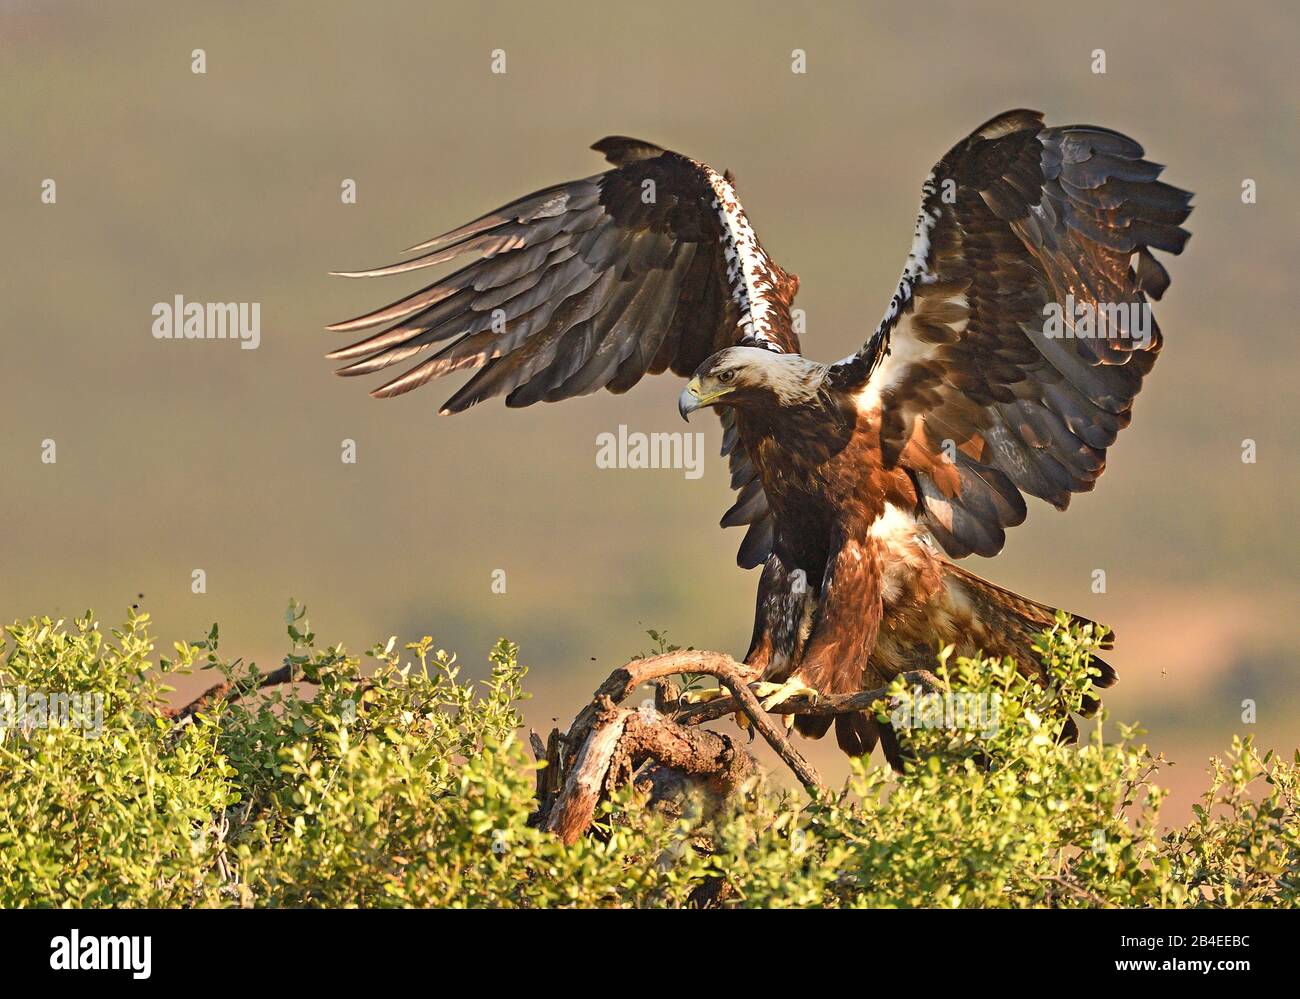 Spanish Imperial Eagle (Aquila adalberti) in landing approach, Extremadura, Spain Stock Photo